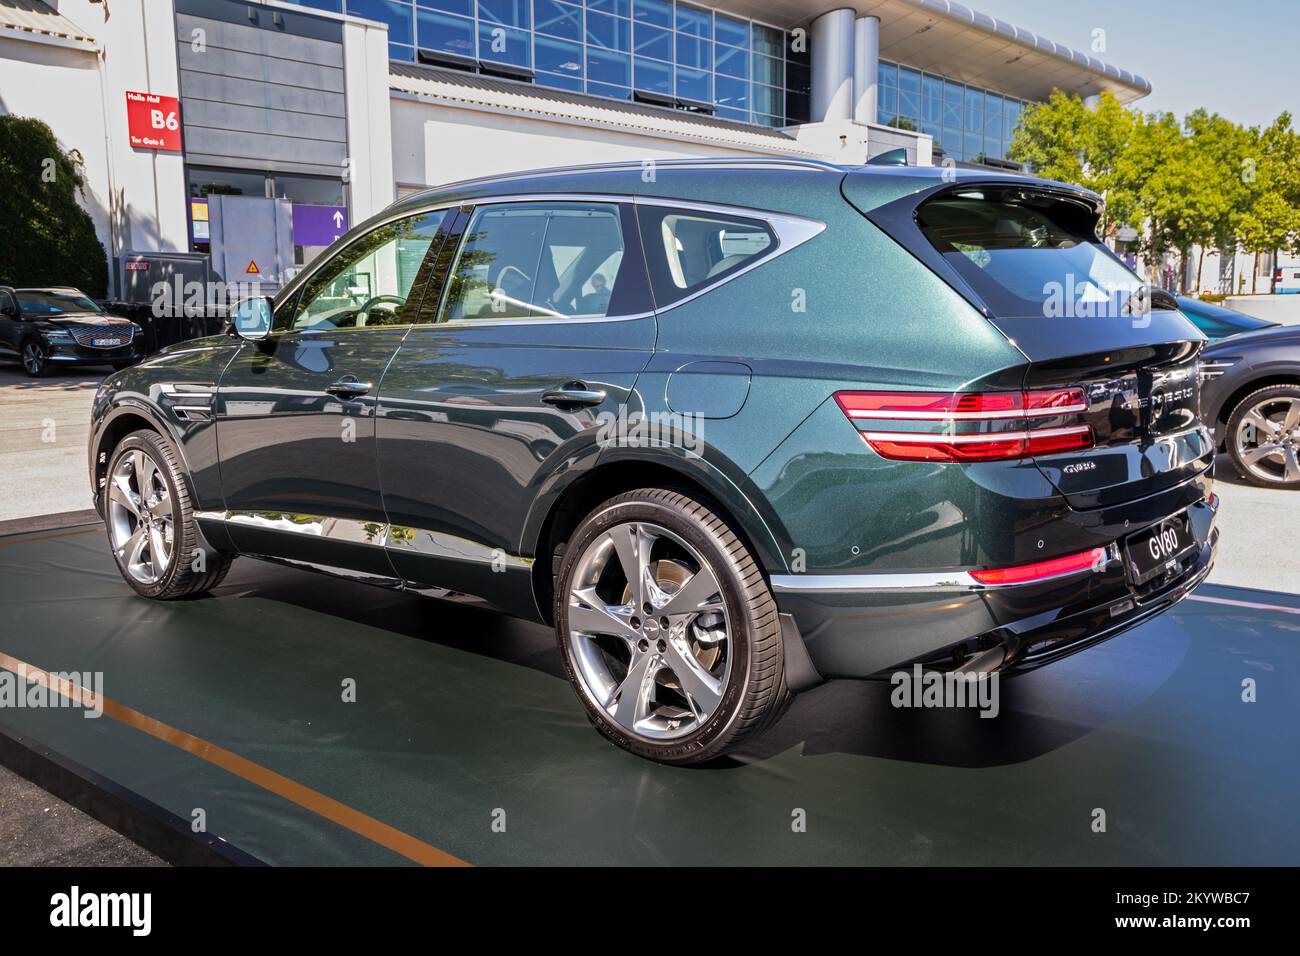 Genesis GV80 luxury SUV car showcased at the IAA Mobility 2021 motor show in Munich, Germany - September 6, 2021. Stock Photo